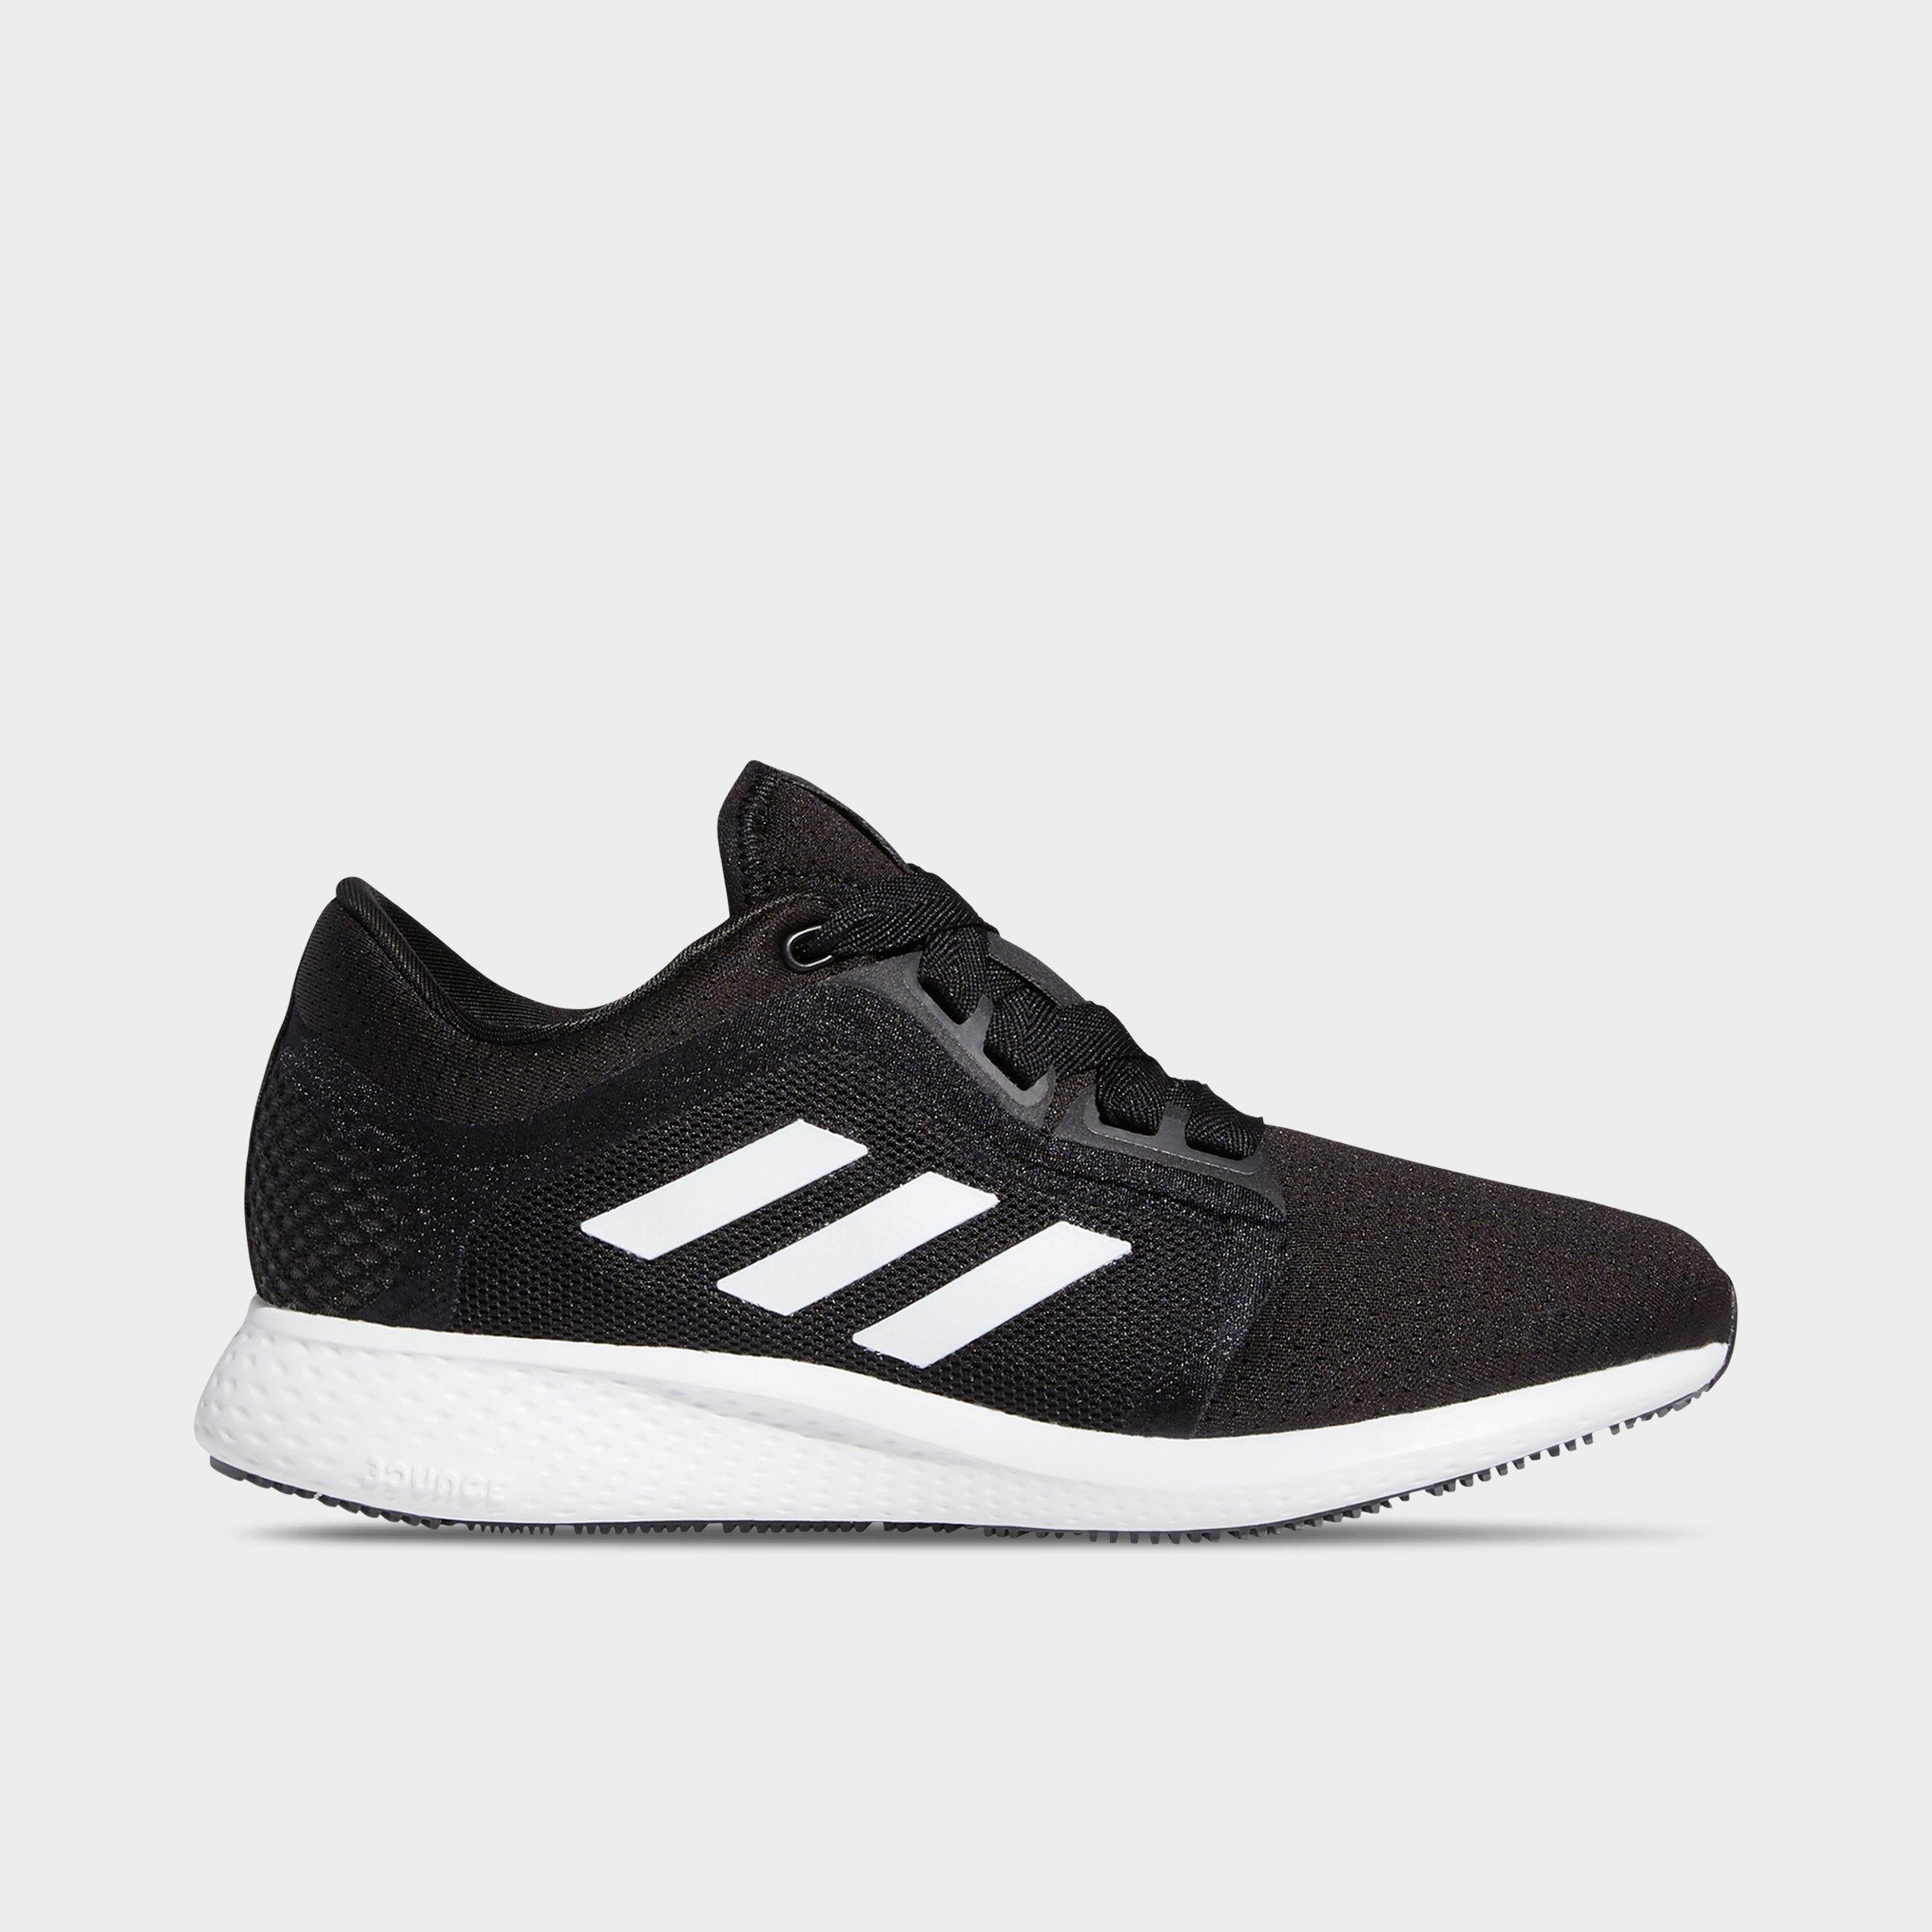 adidas edge luxe running shoes